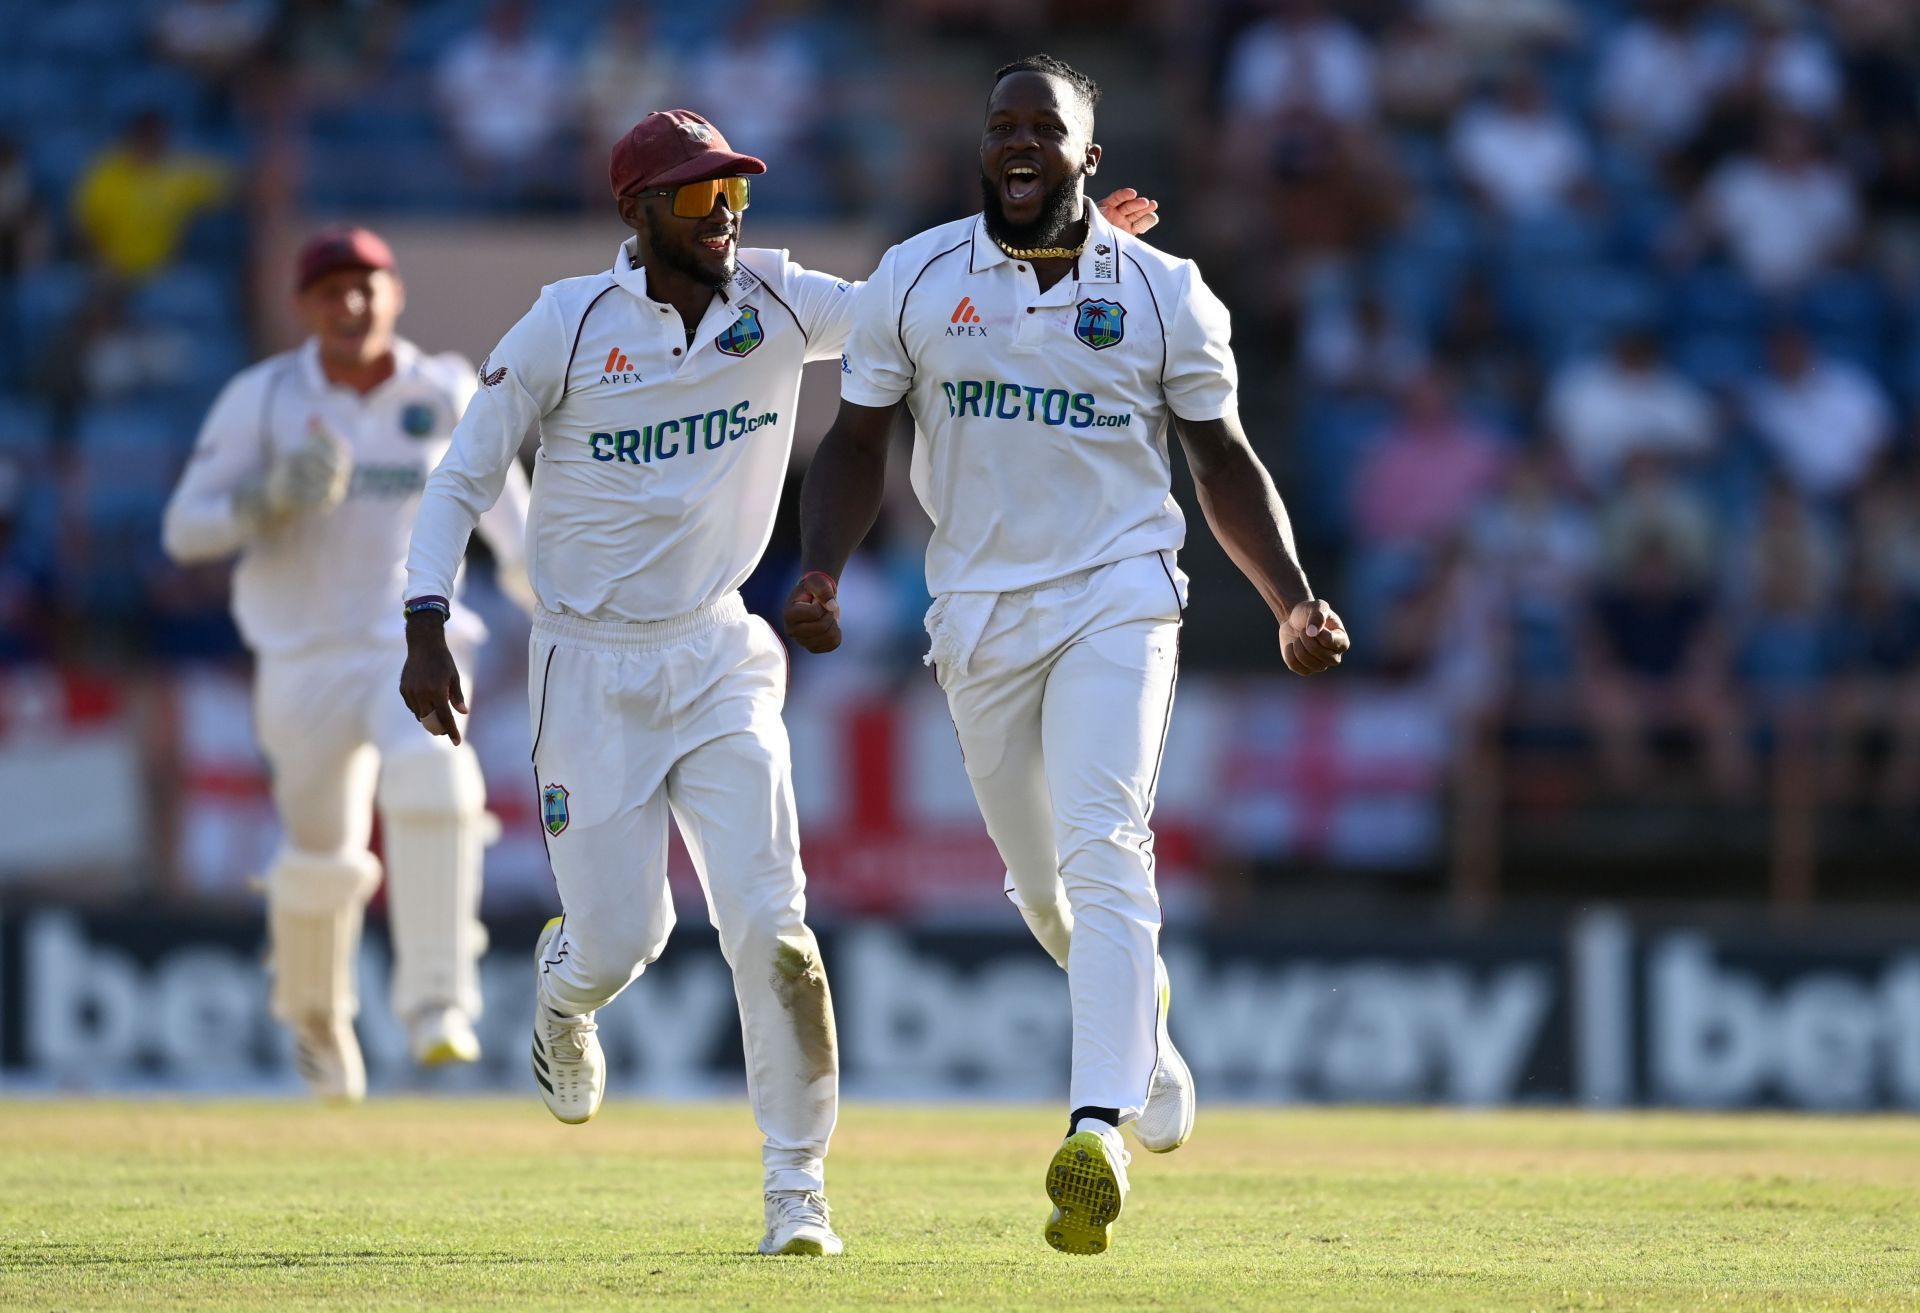 West Indies v England - 3rd Test: Day 3 (Image courtesy: Getty Images)